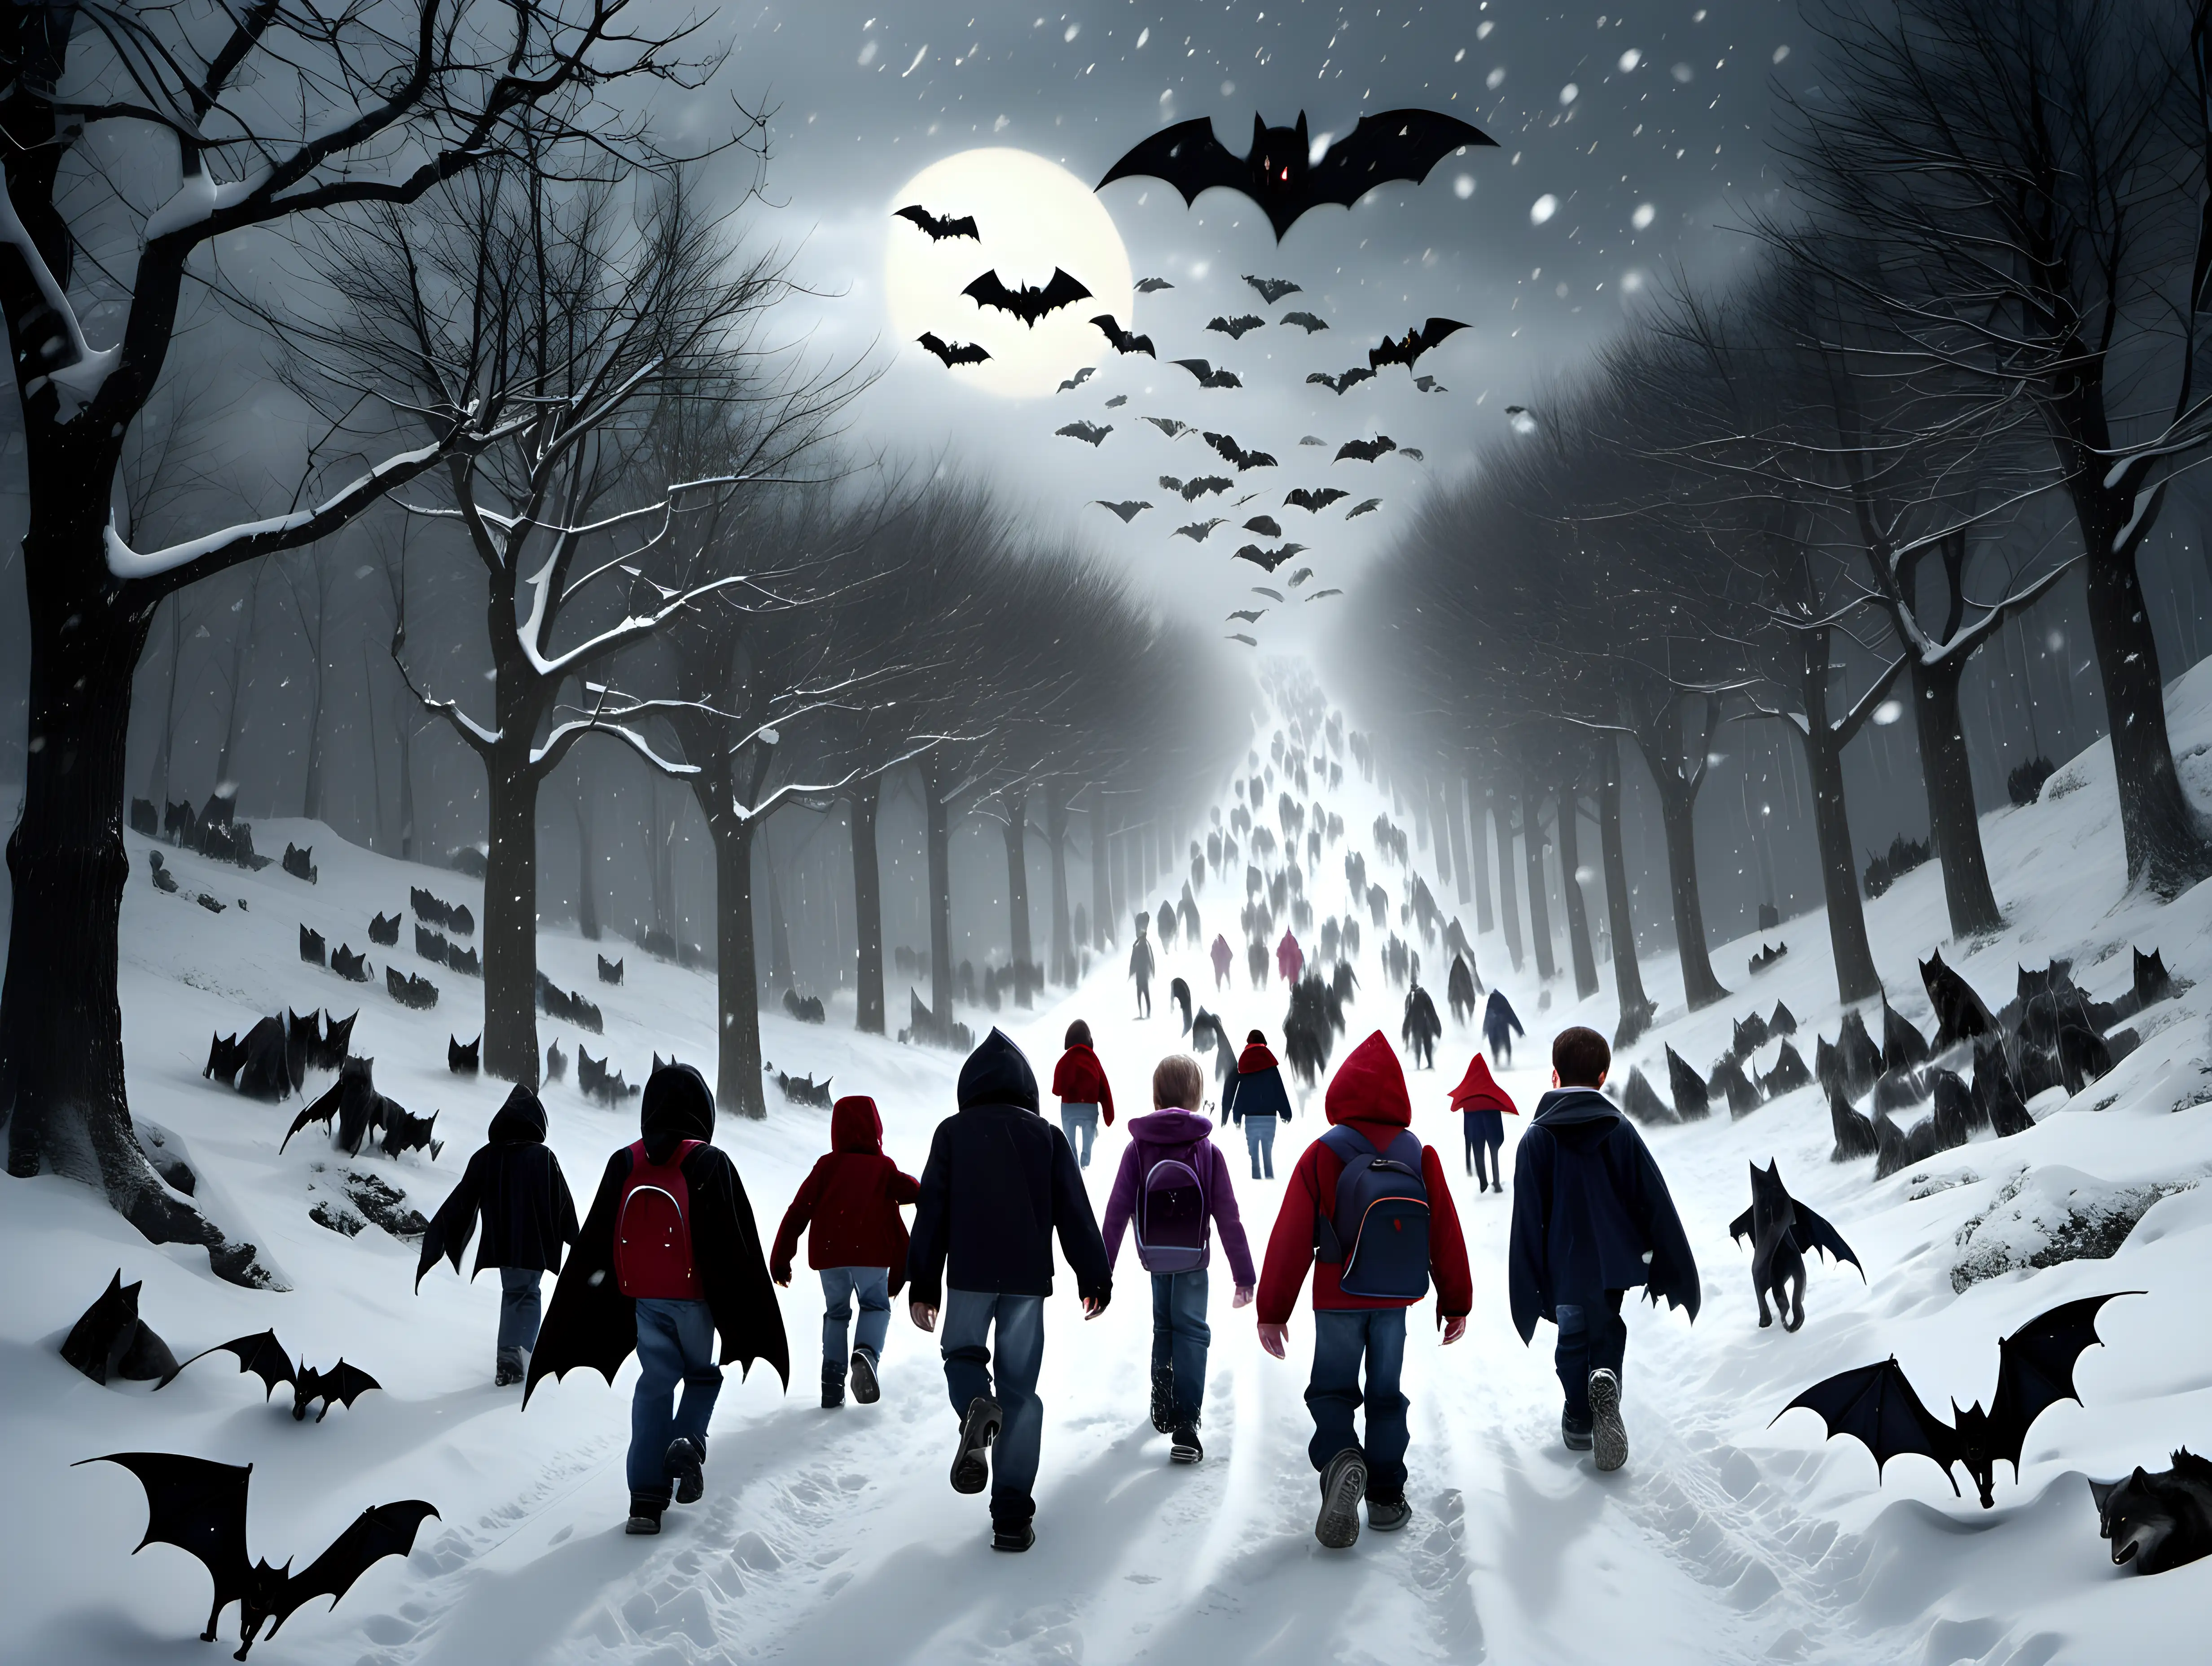 Brave Children Confronting Winters Supernatural Challenge on the Way to School